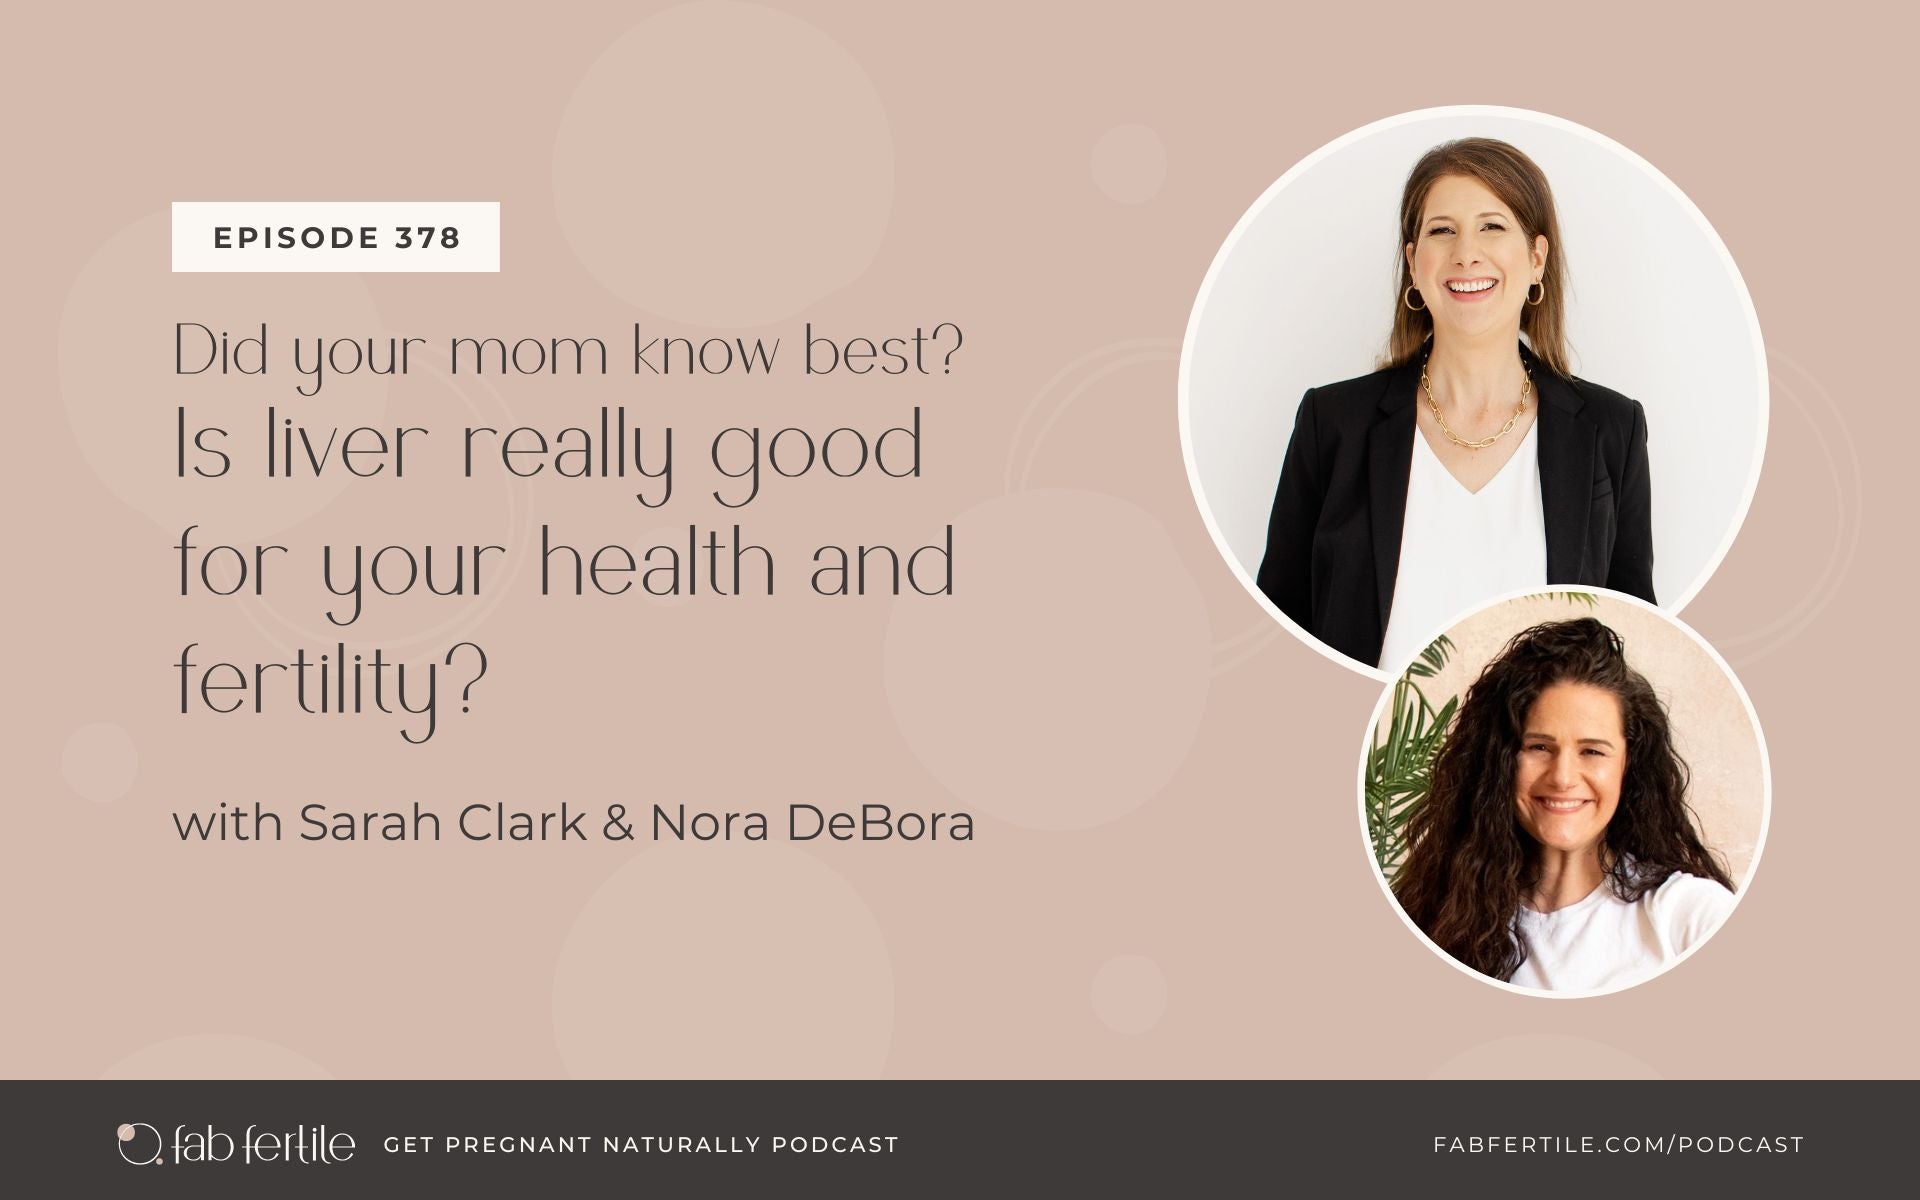 Did your mom know best? Is liver really good for your health and fertility? with Nora DeBora